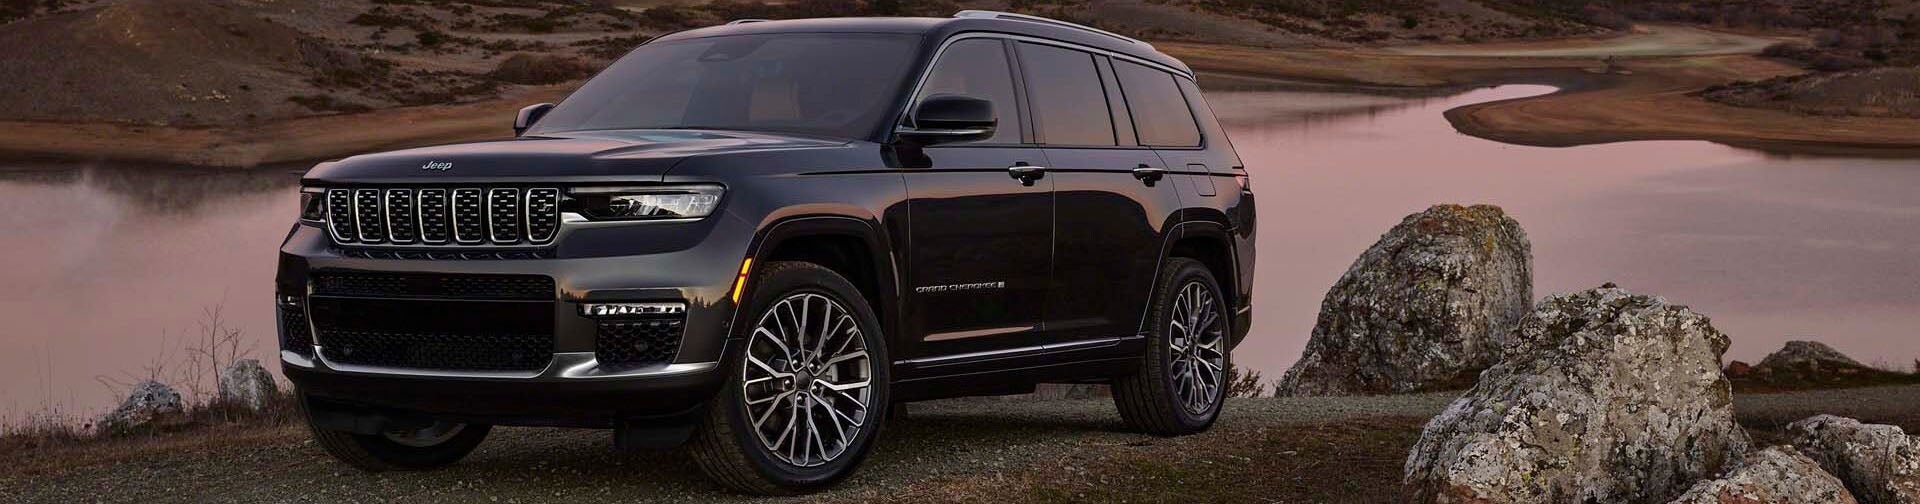 2021 JEEP Grand Cherokee L For Sale